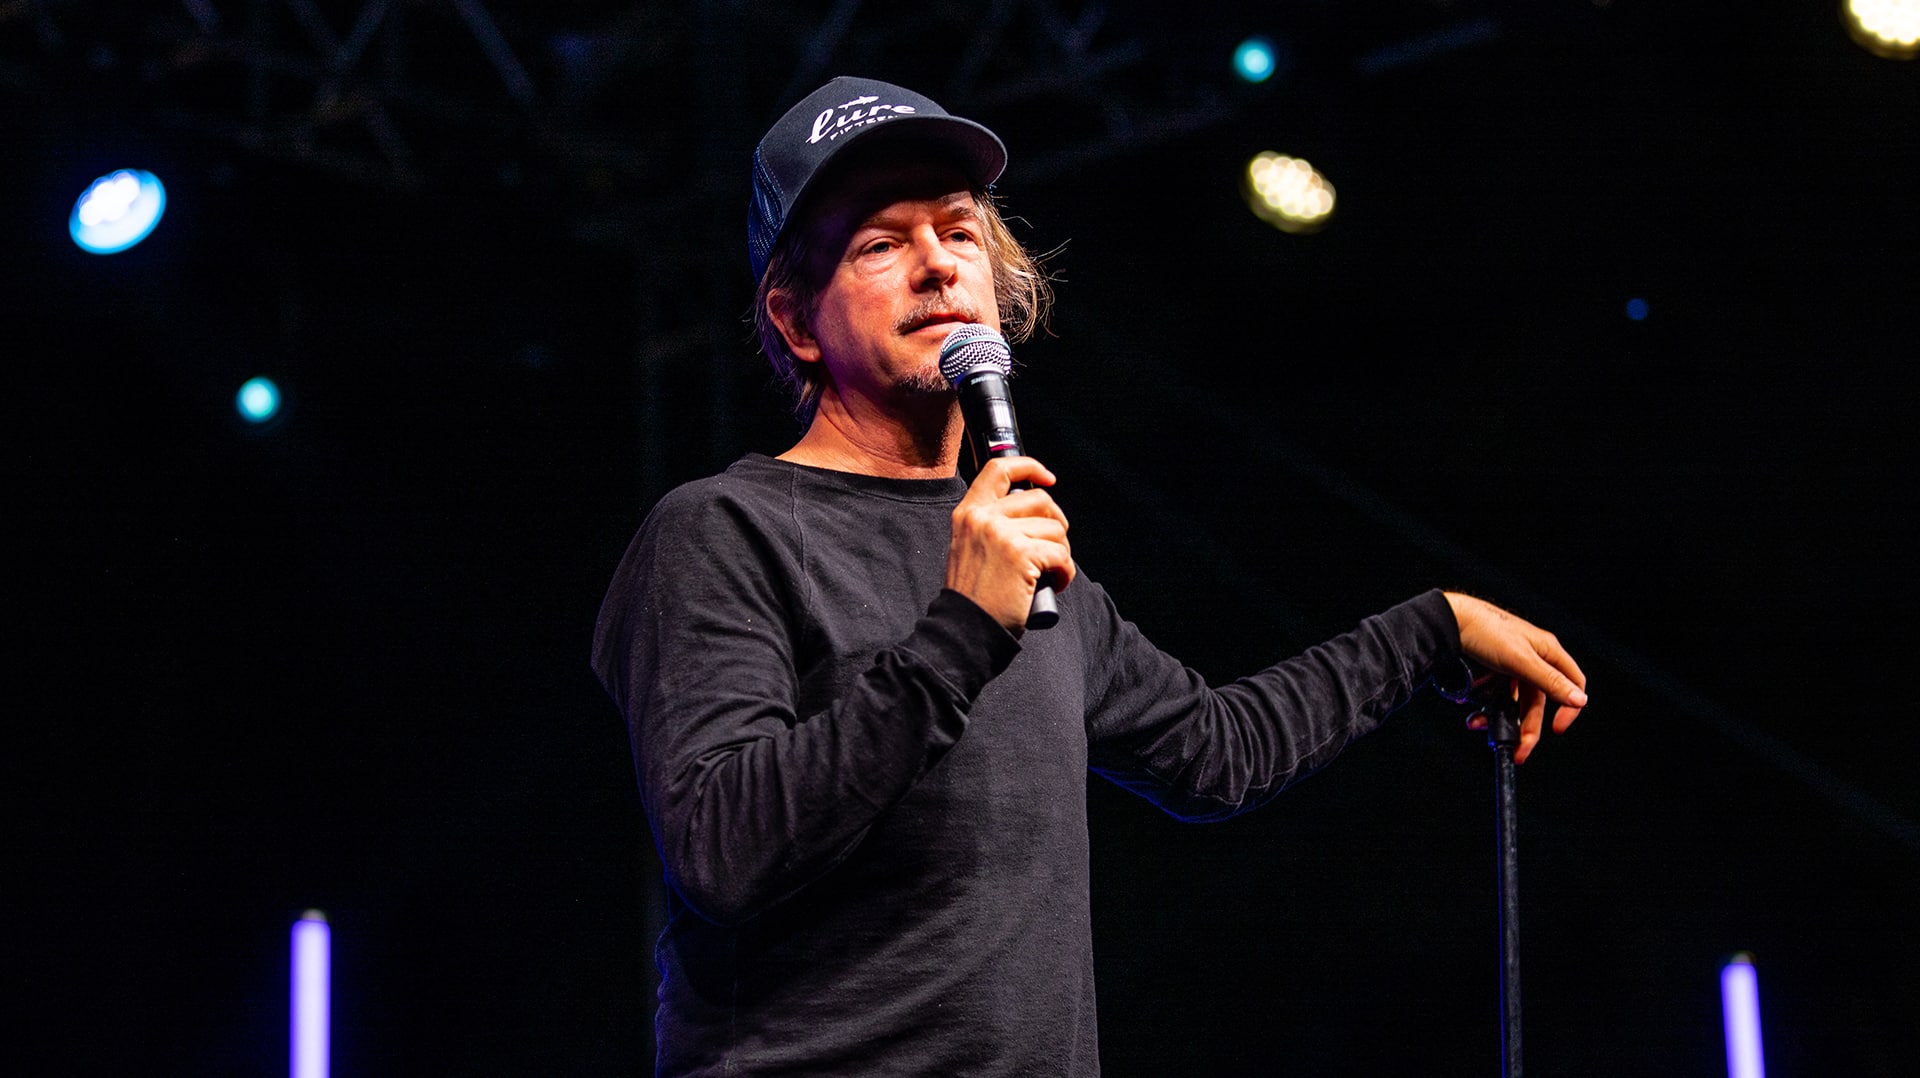 David Spade comedian performs at a private event